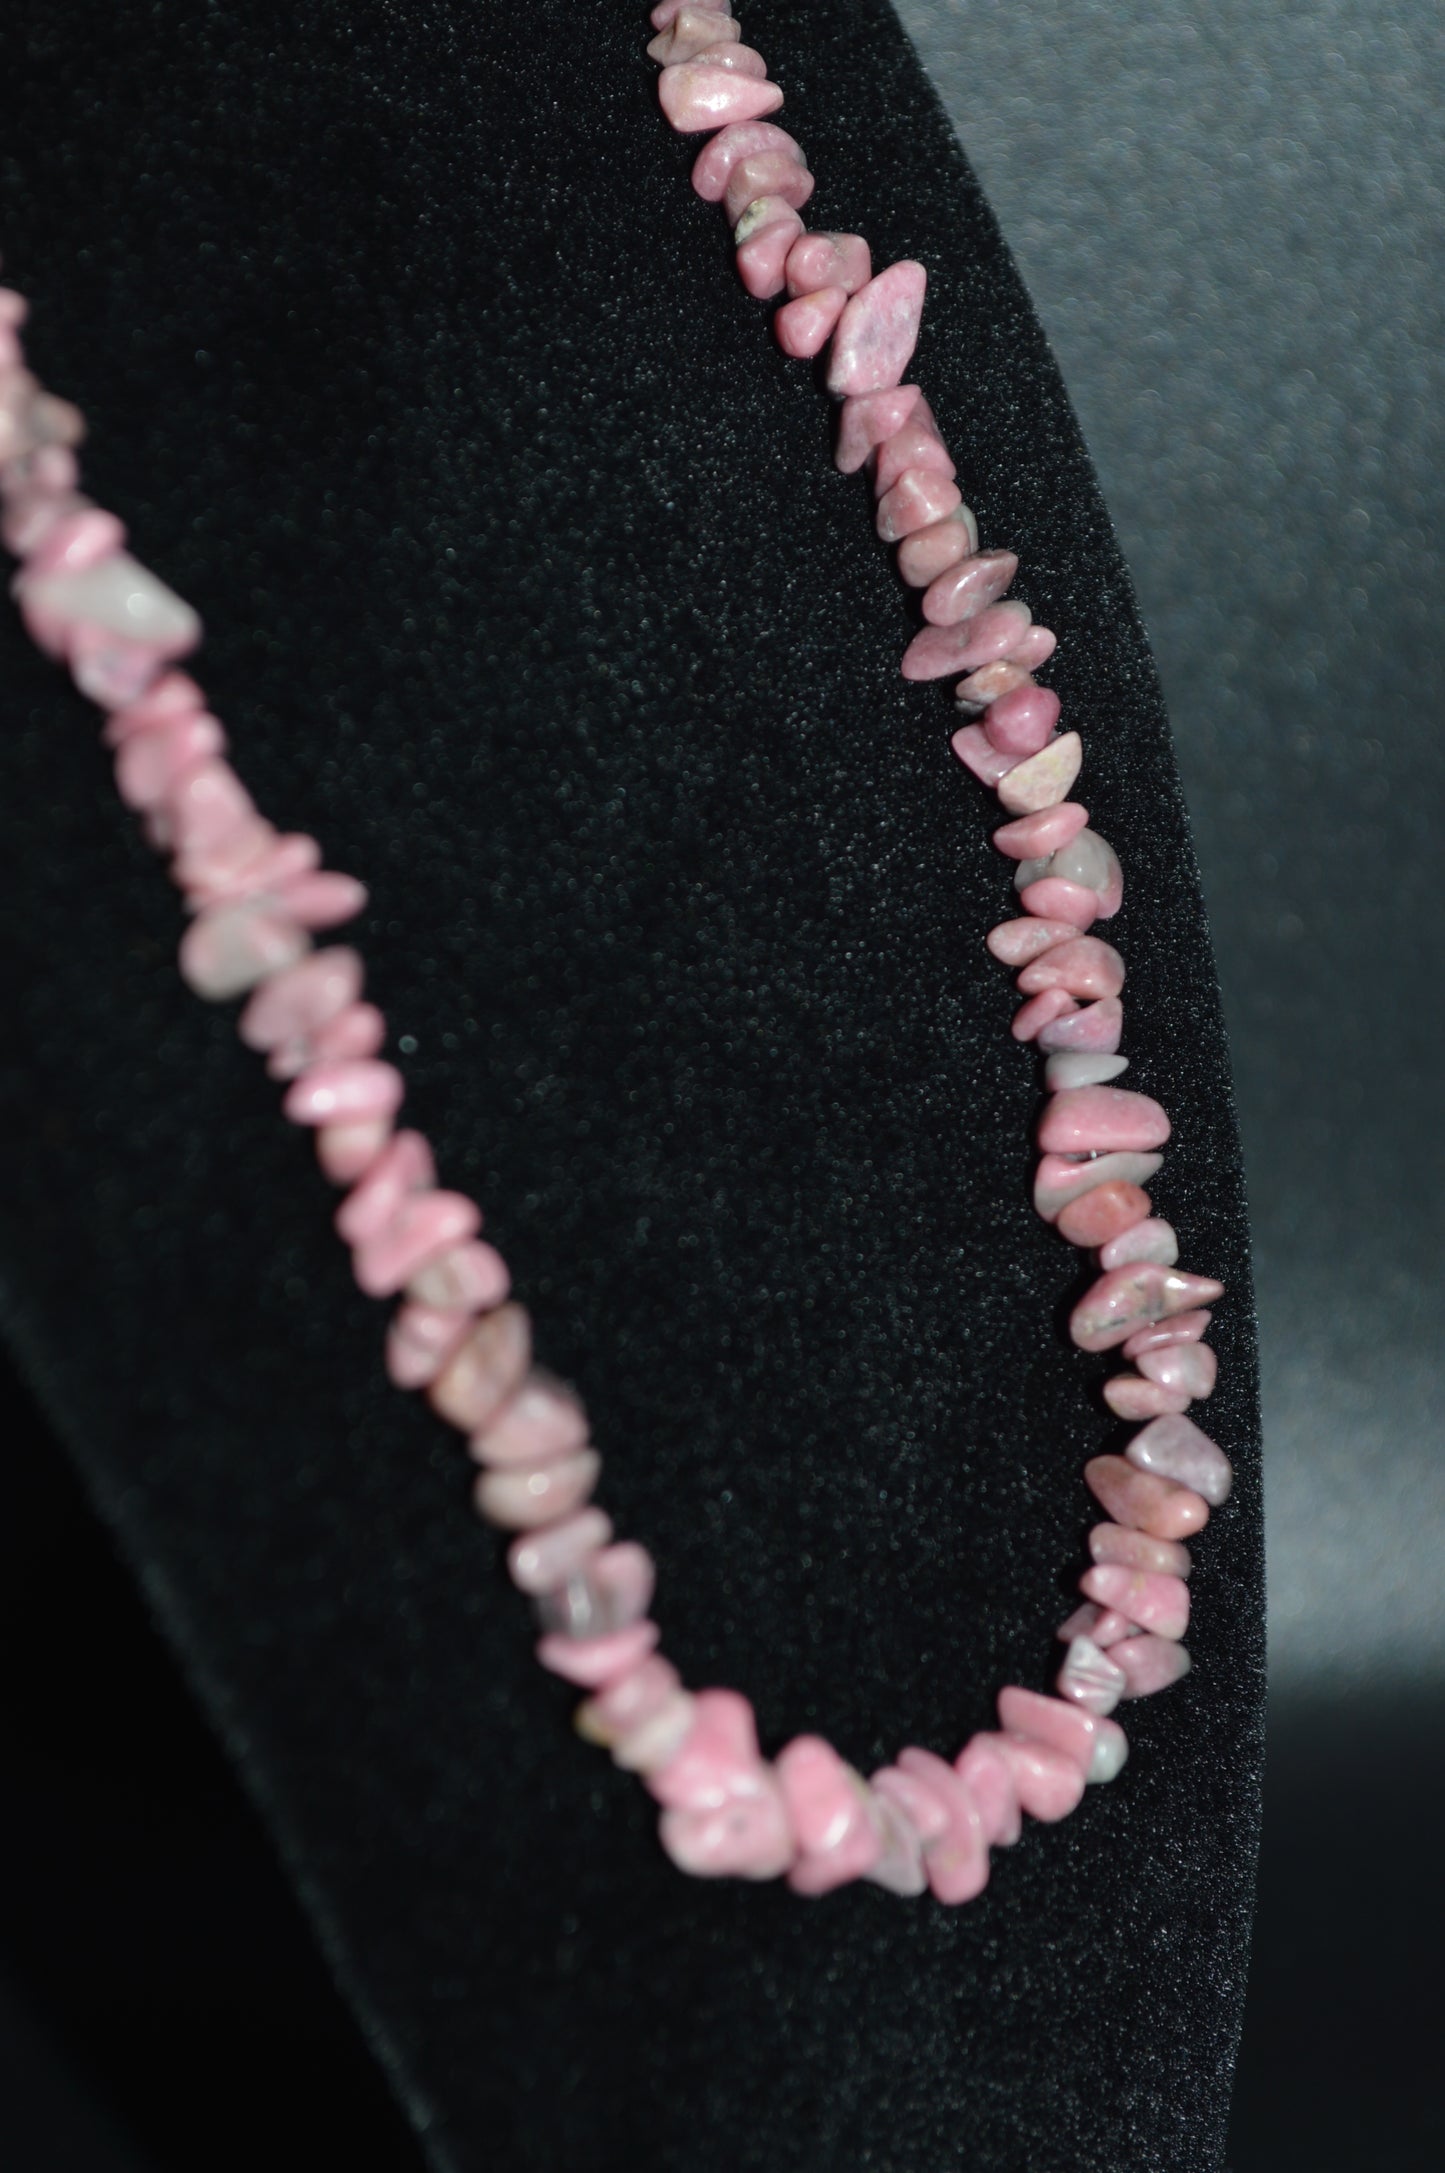 Rhodonite Chips Necklace and Earring Set (Pink)